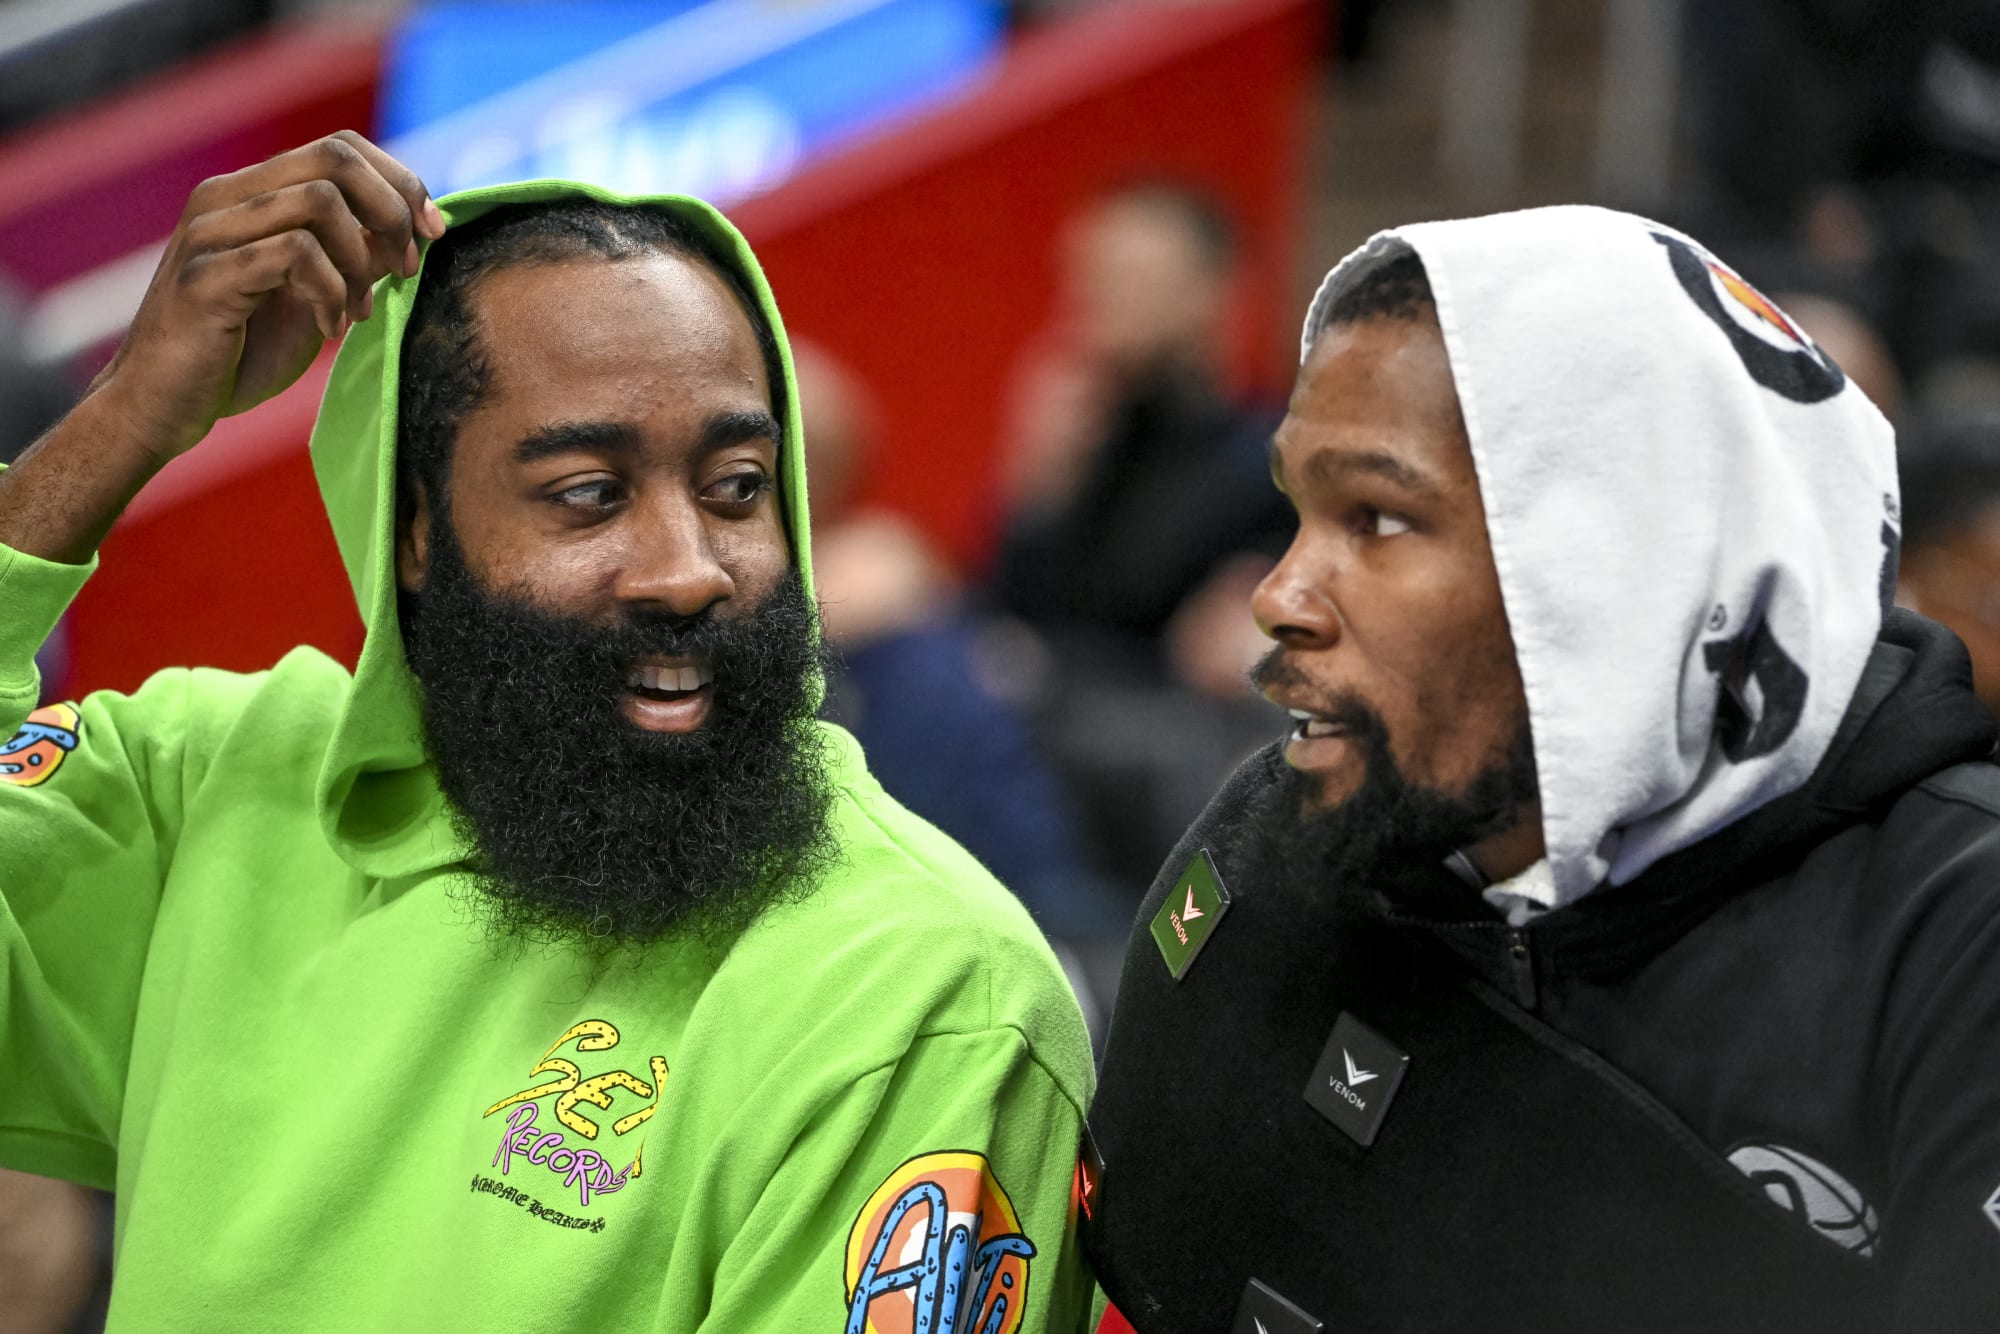 LeBron James and Kevin Durant in hilarious NBA All-Star Draft as James  Harden trade adds spice, NBA News